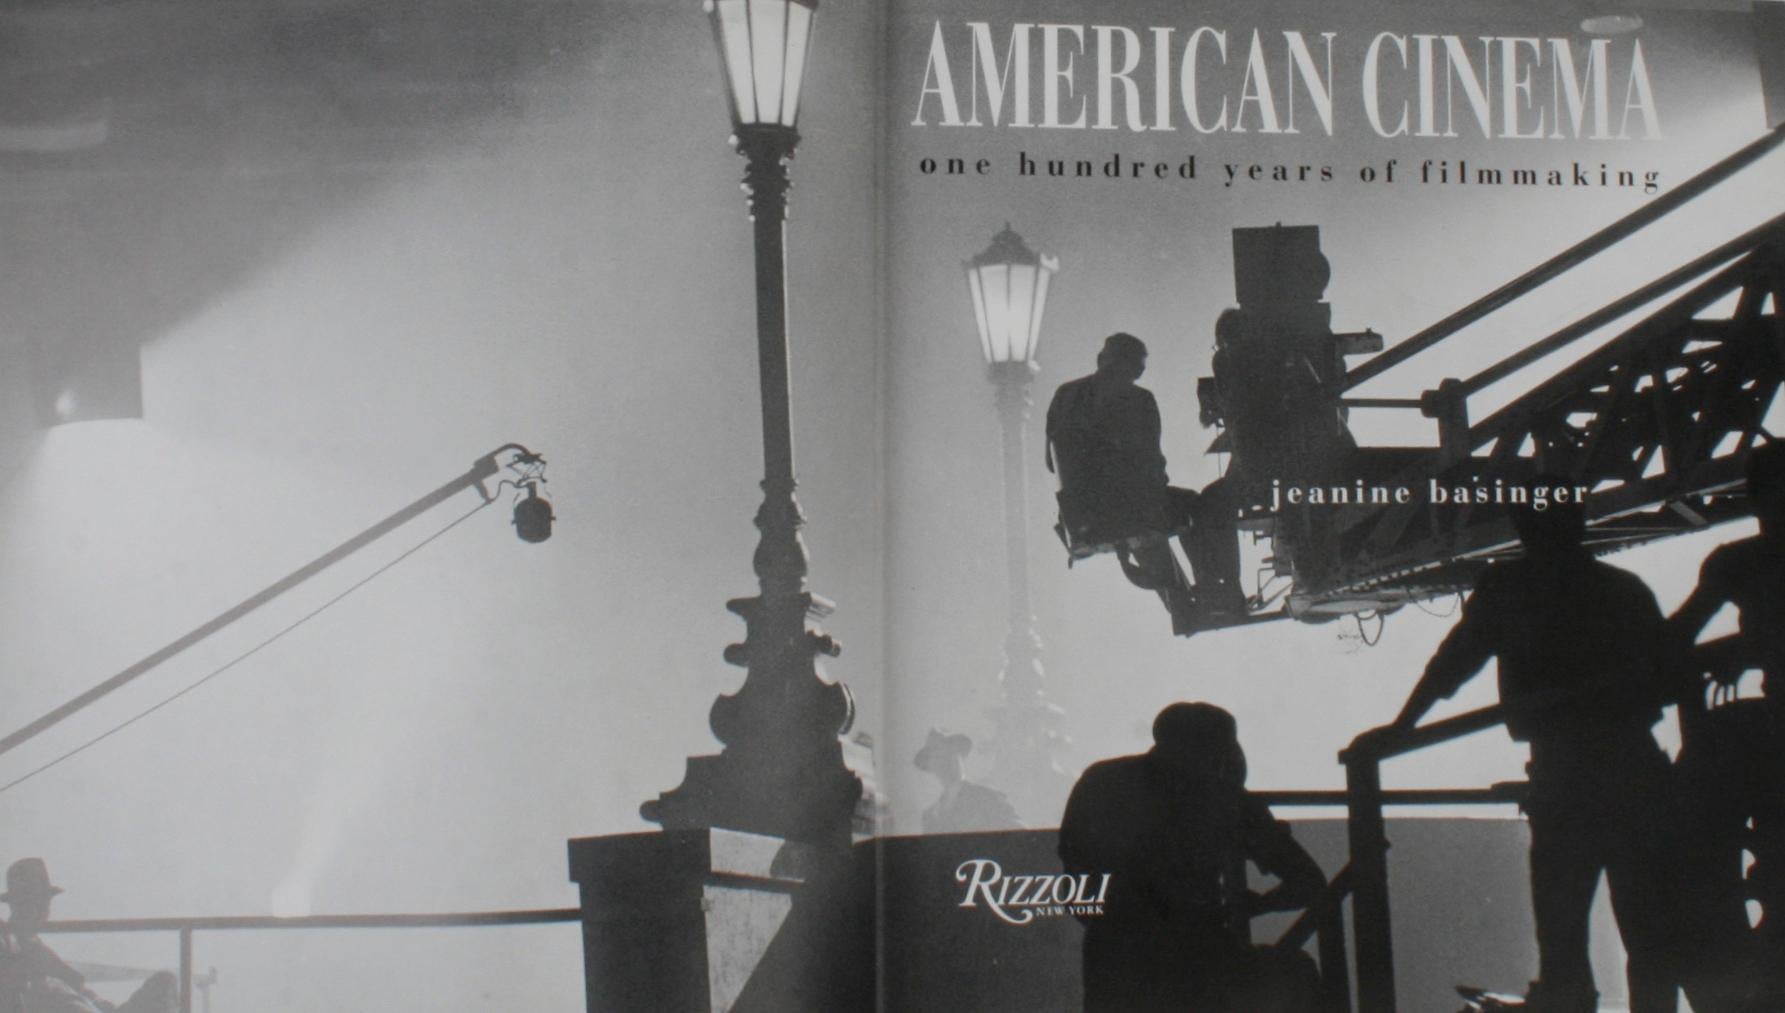 American Cinema, One Hundred Years of Filmmaking by Jeanie Basinger. New York: Rizzoli, 1994. 1st Ed hardcover published to commemorate the centennial celebration of the birth of American film and a 10-part PBS-TV series that aired in January of